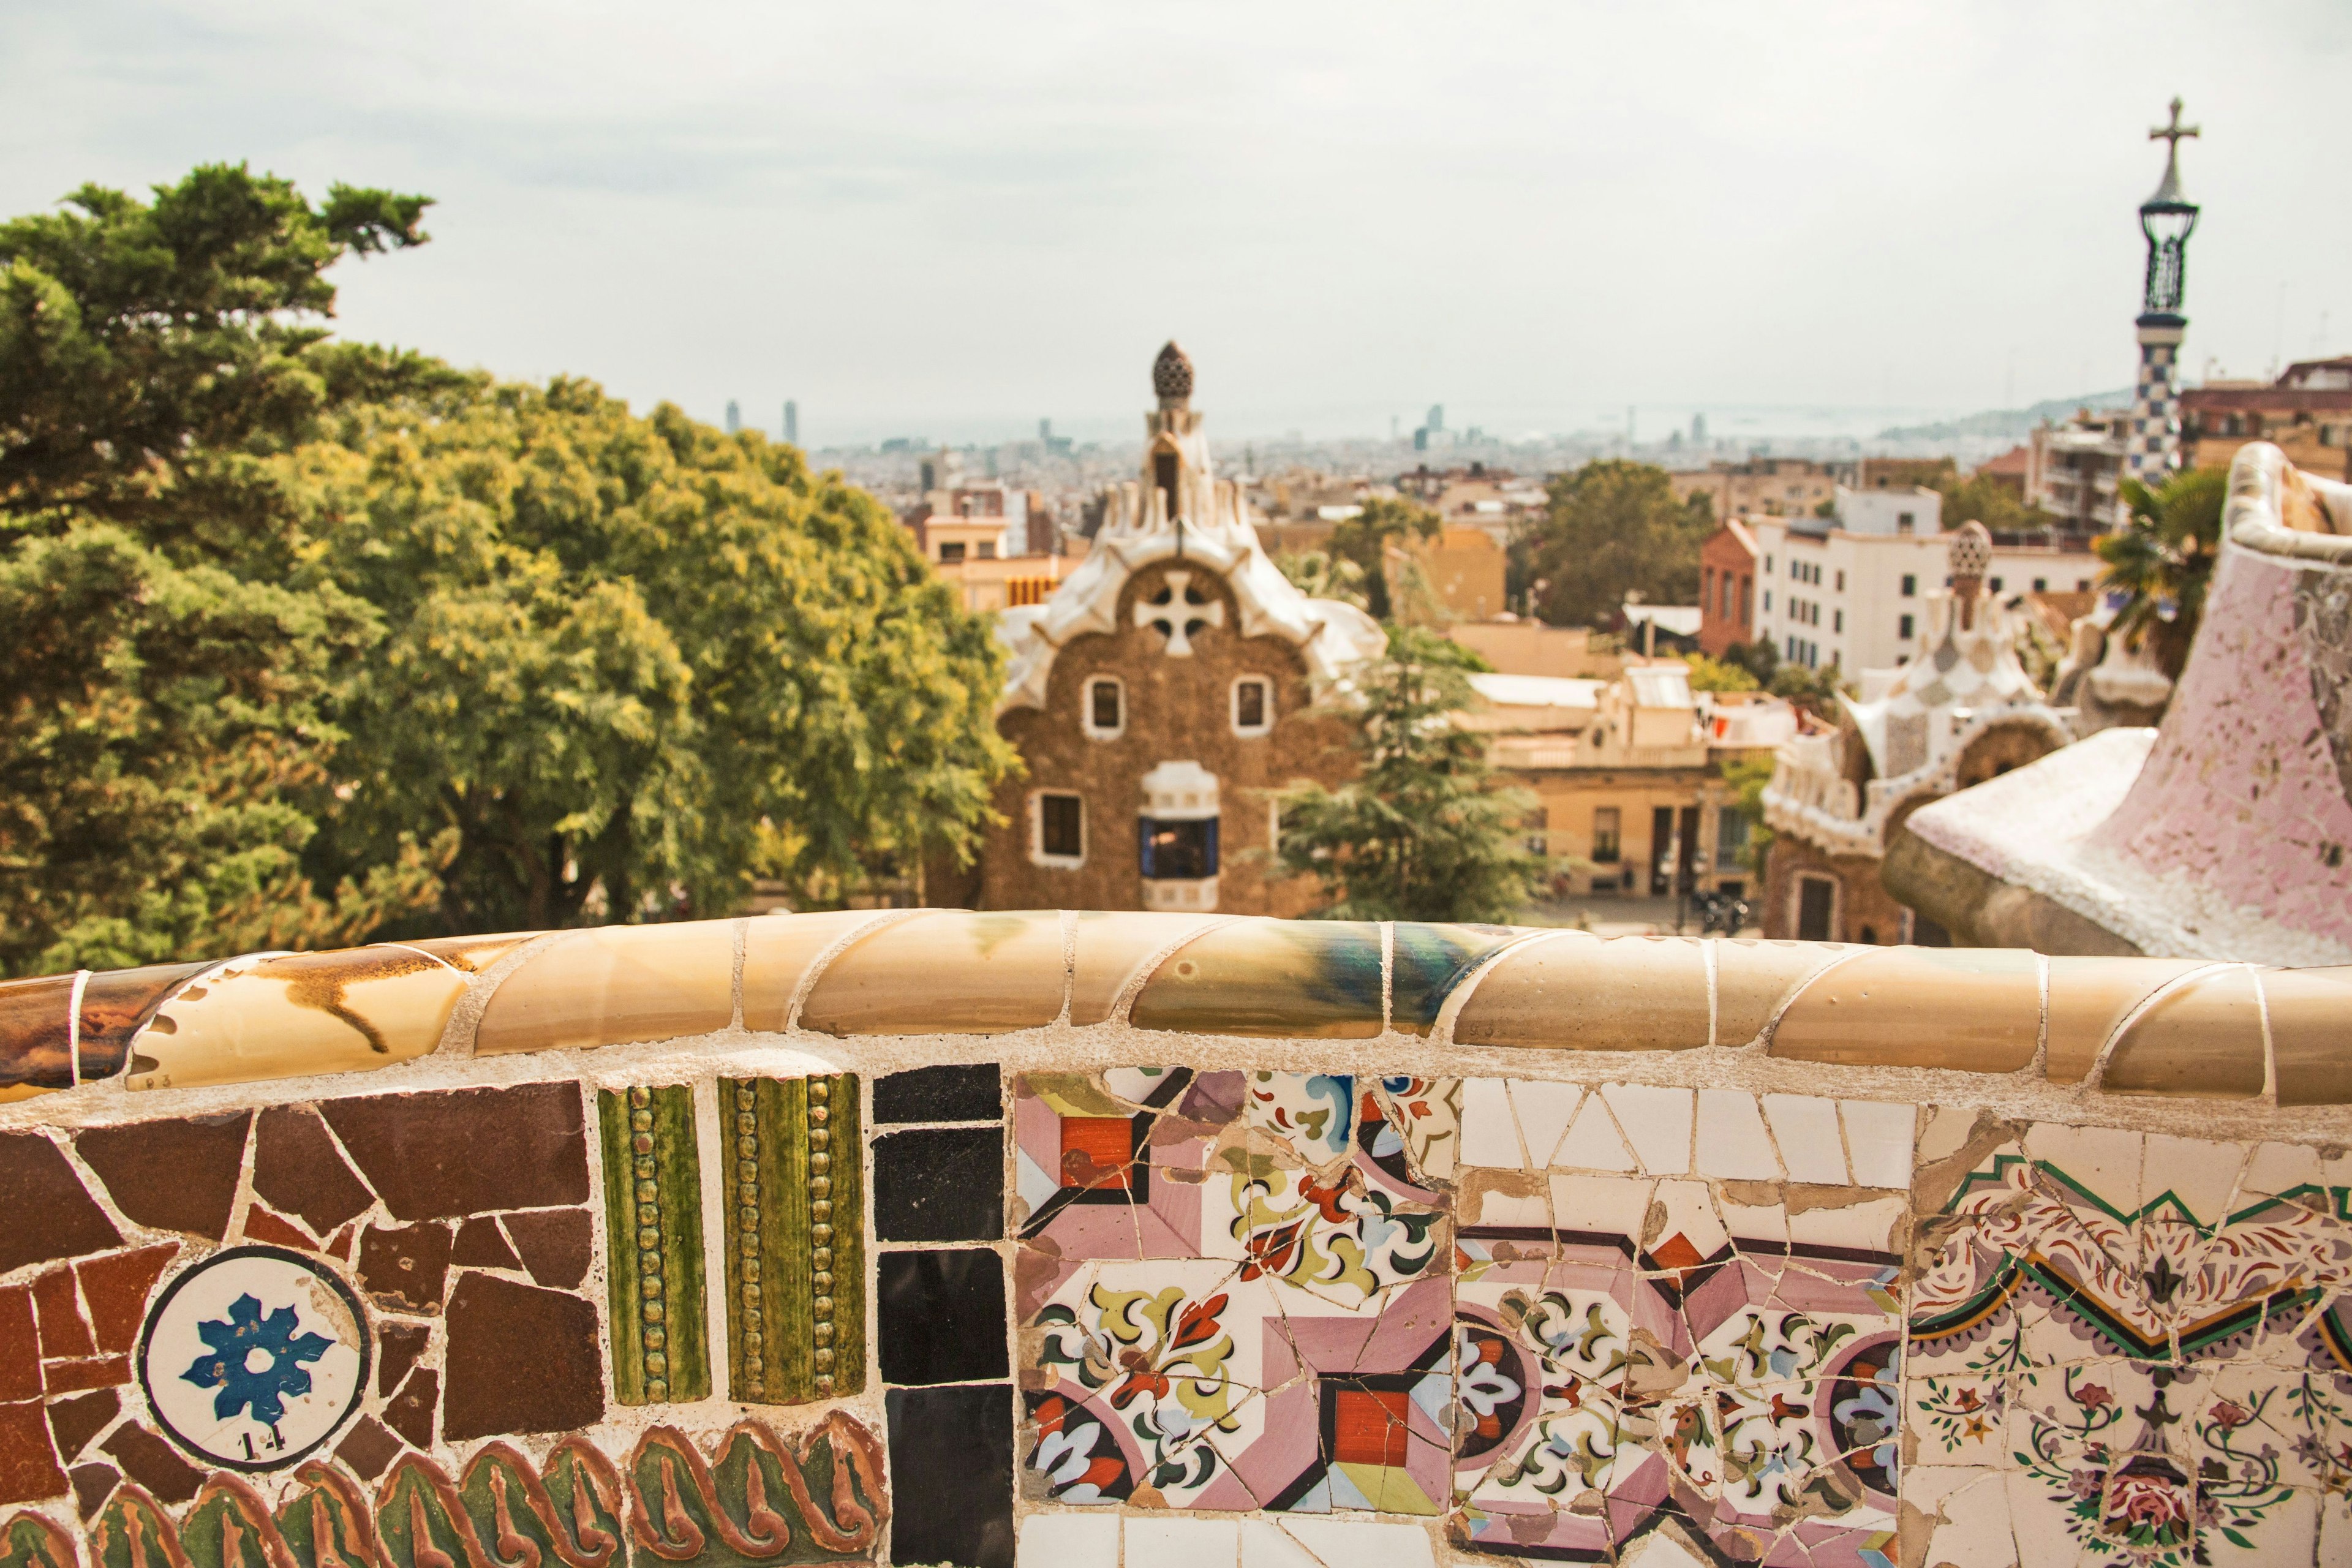 Barcelona Parque Guell City View.jpg